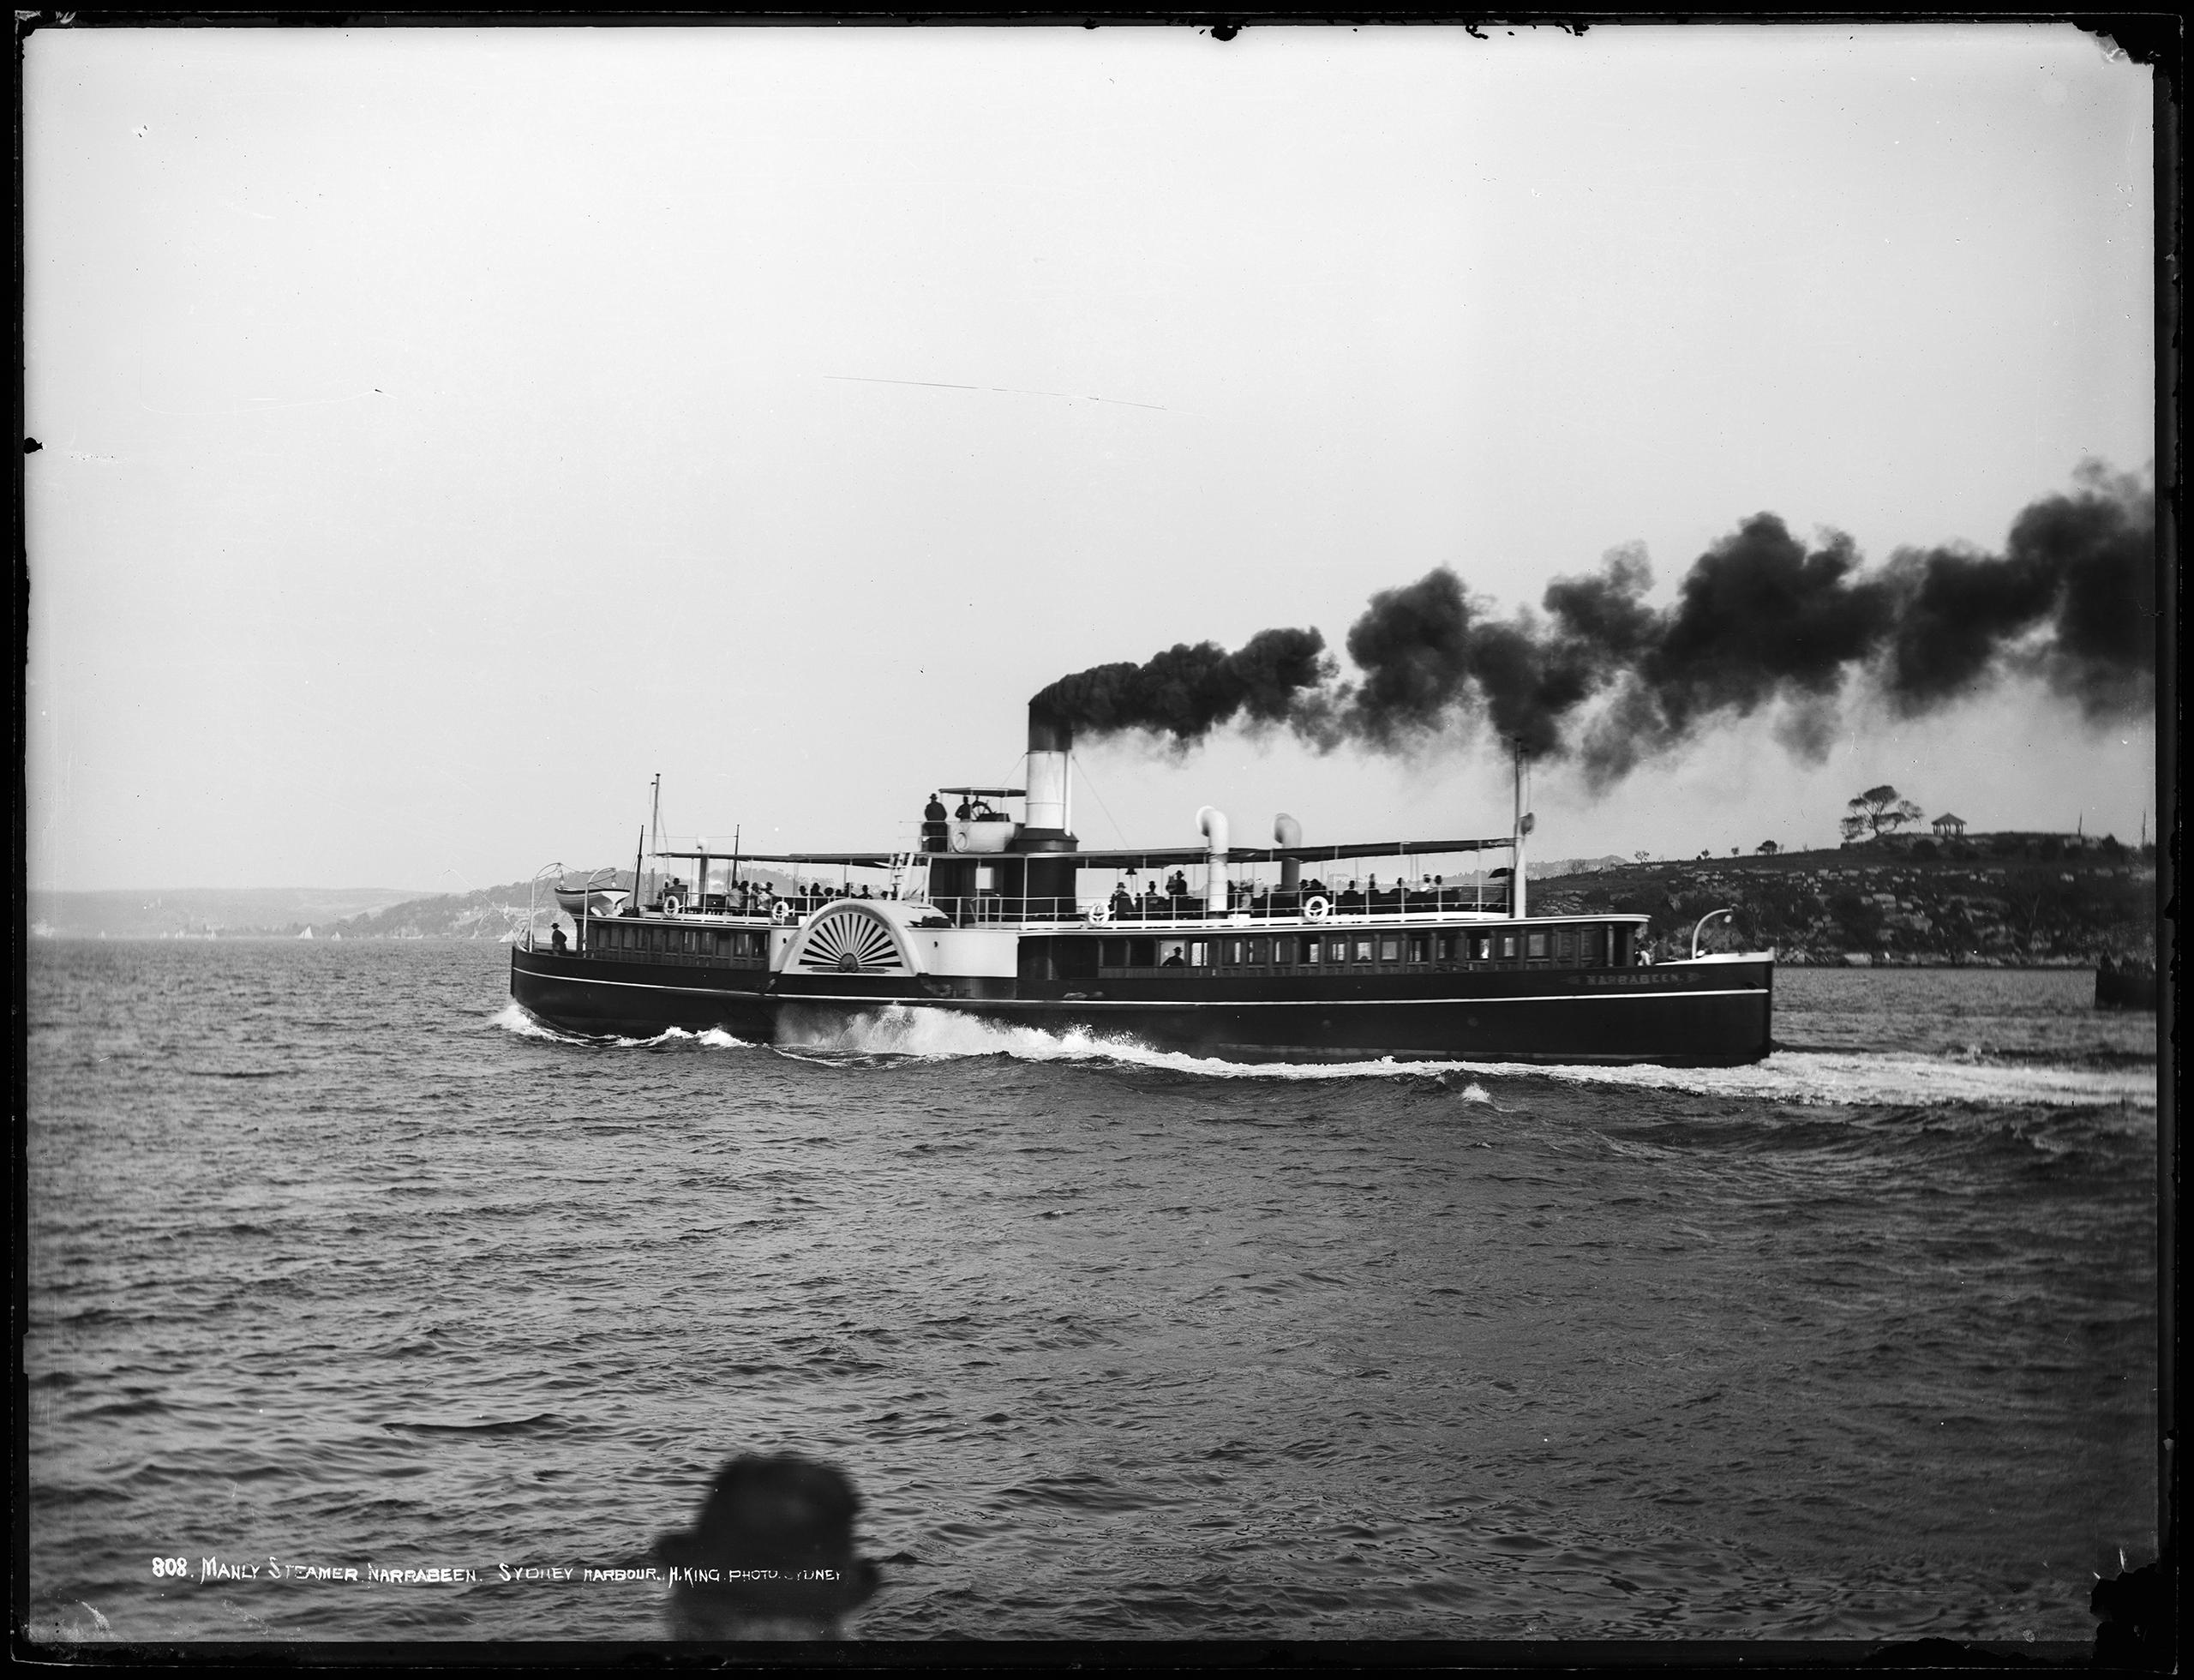 Glass plate negative of Manly paddle ferry 'Narrabeen', Sydney Harbour, 1886-1899